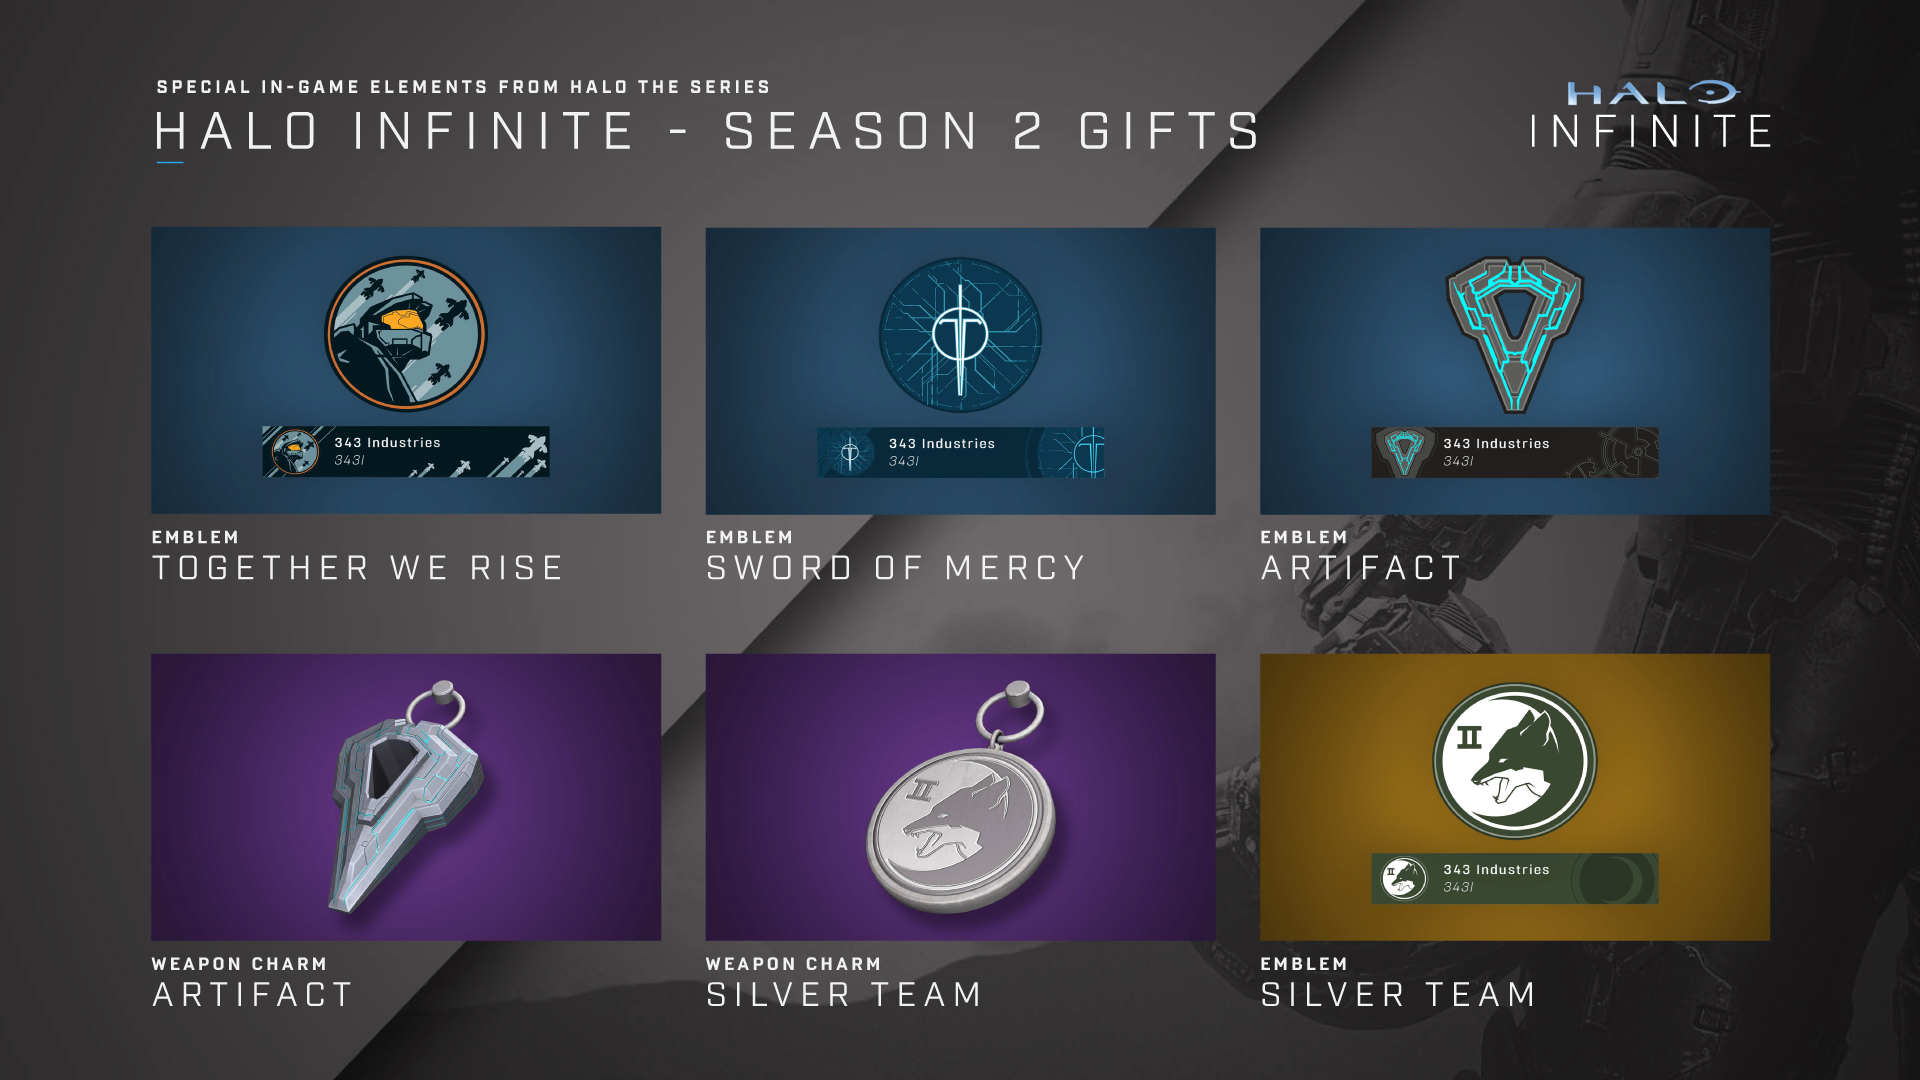 Image of Silver Gifts coming to Halo Infinite, including: Together We Rise emblem, Sword of Mercy emblem, Artifact emblem, Artifact weapon charm, Silver Team weapon charm, Silver Team emblem